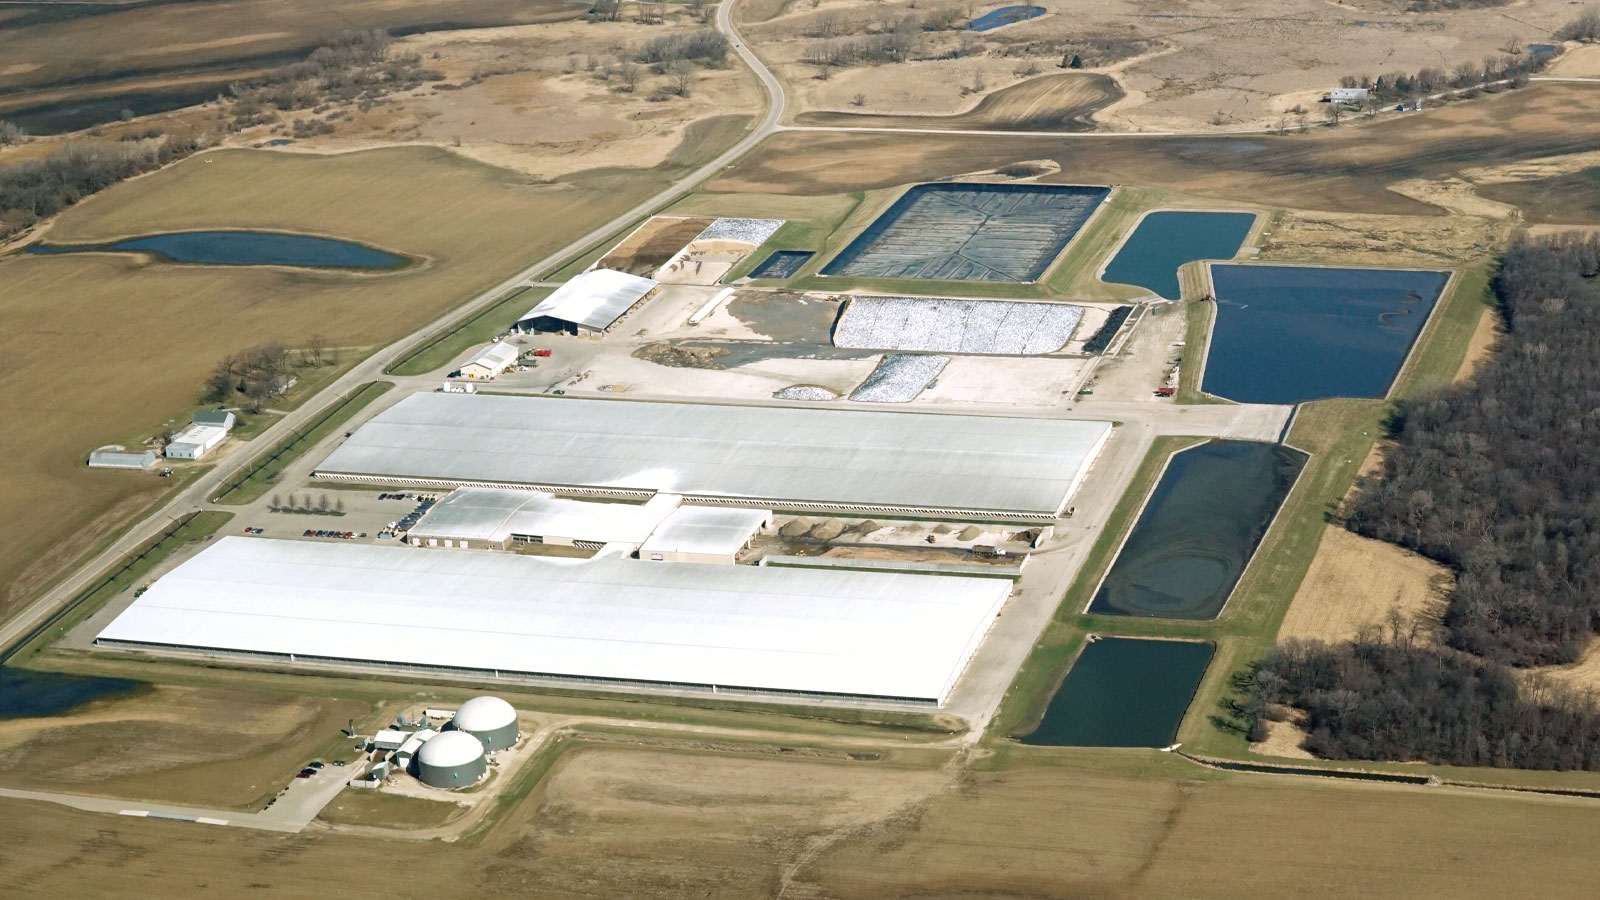 Aerial view of a concentrated animal feeding operation (CAFO) in Wisconsin. Large windowless buildings, waste lagoons, and barns are visible